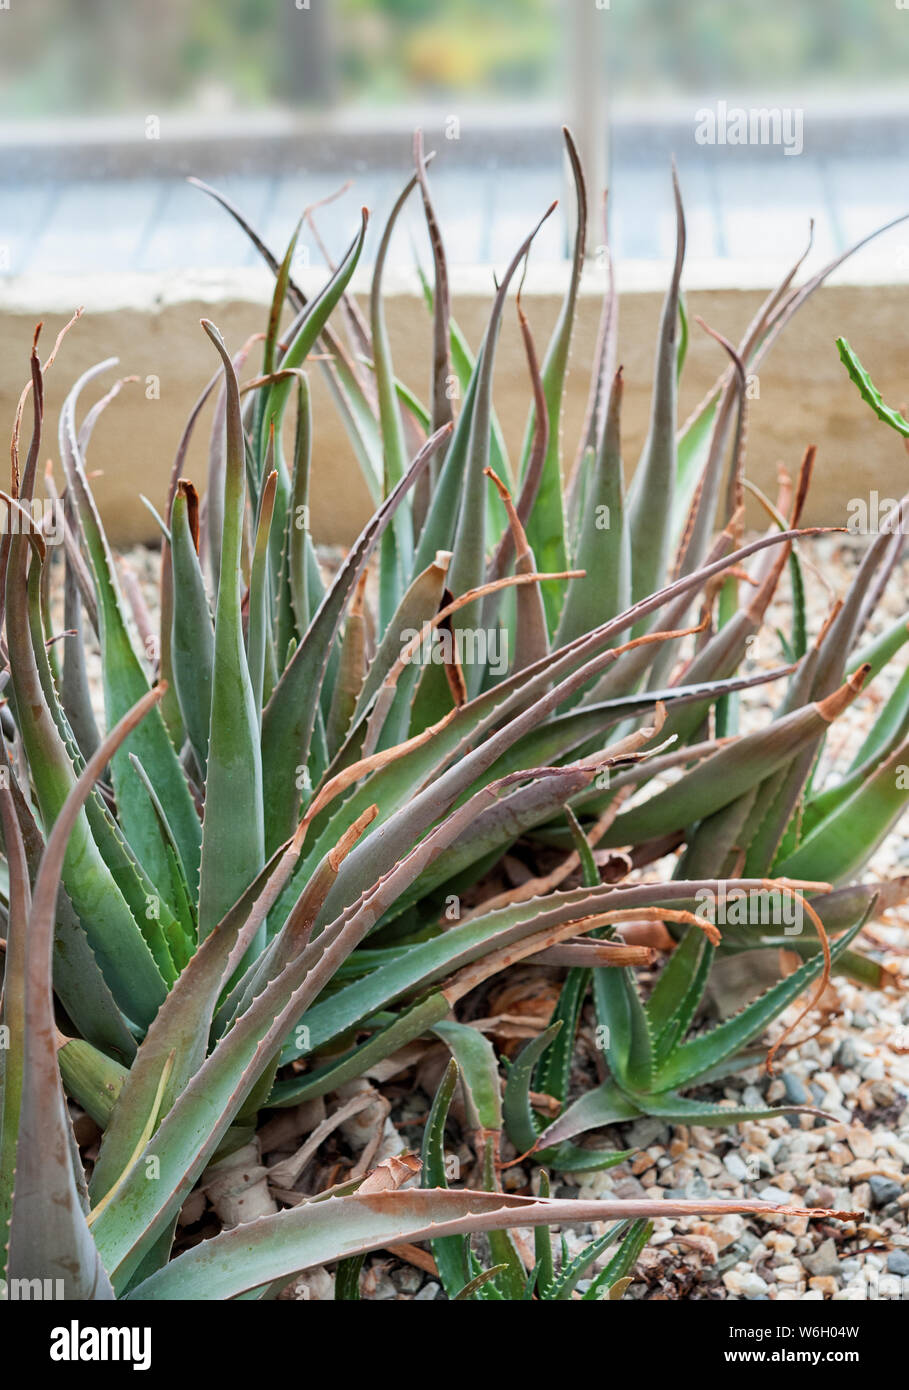 Aloe vera is a succulent plant species cultivated for agricultural, pharmaceutical and medicinal uses. Stock Photo